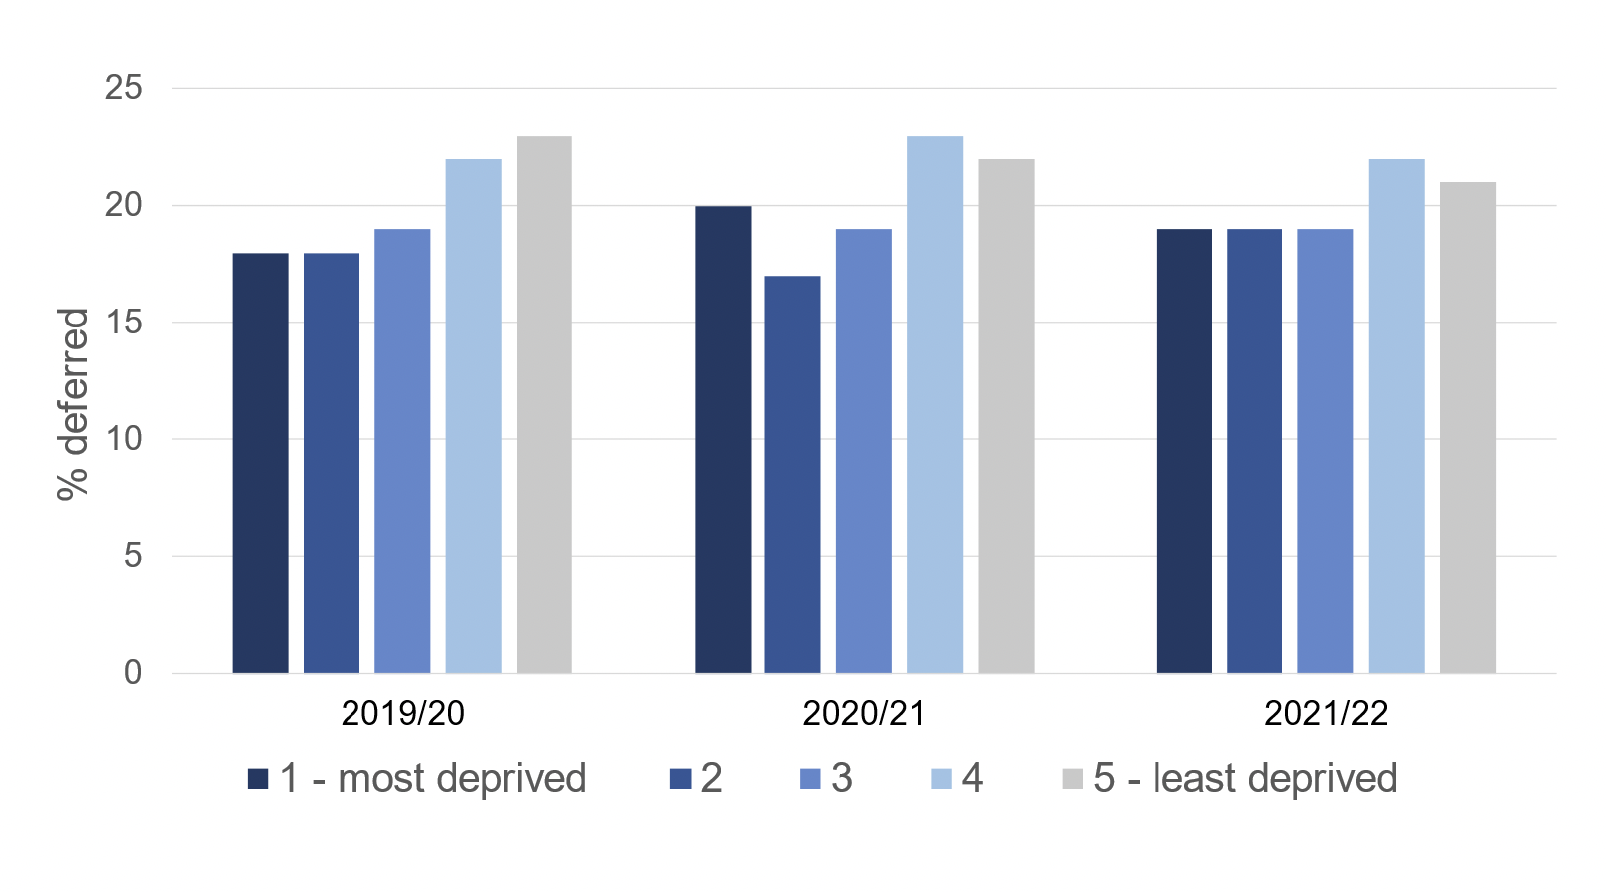 Figure vi is a bar chart of January-February deferral rates in Scotland from 2019/20 to 2021/22 according to local authority deprivation, SIMD quintiles. It shows that deferral rates were higher in the least deprived areas across all three academic years. Deferral rates remained fairly stable across time in all deprivation groups. 